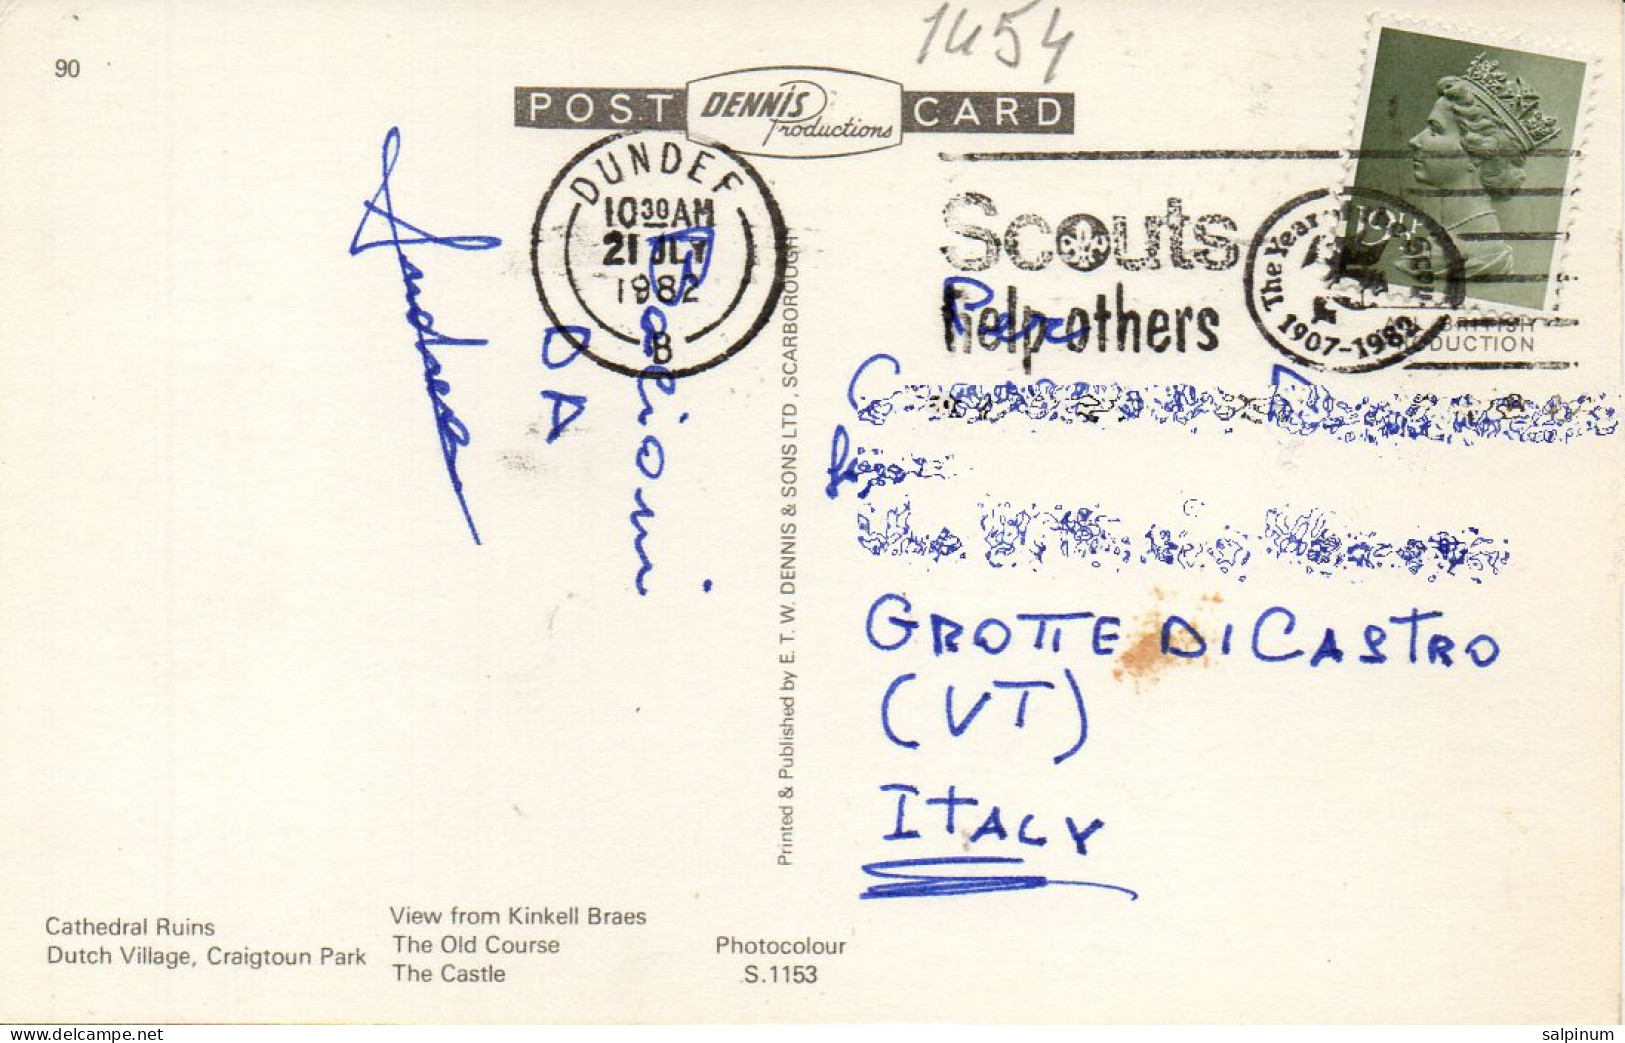 Philatelic Postcard With Stamps Sent From UNITED KINGDOM To ITALY - Lettres & Documents